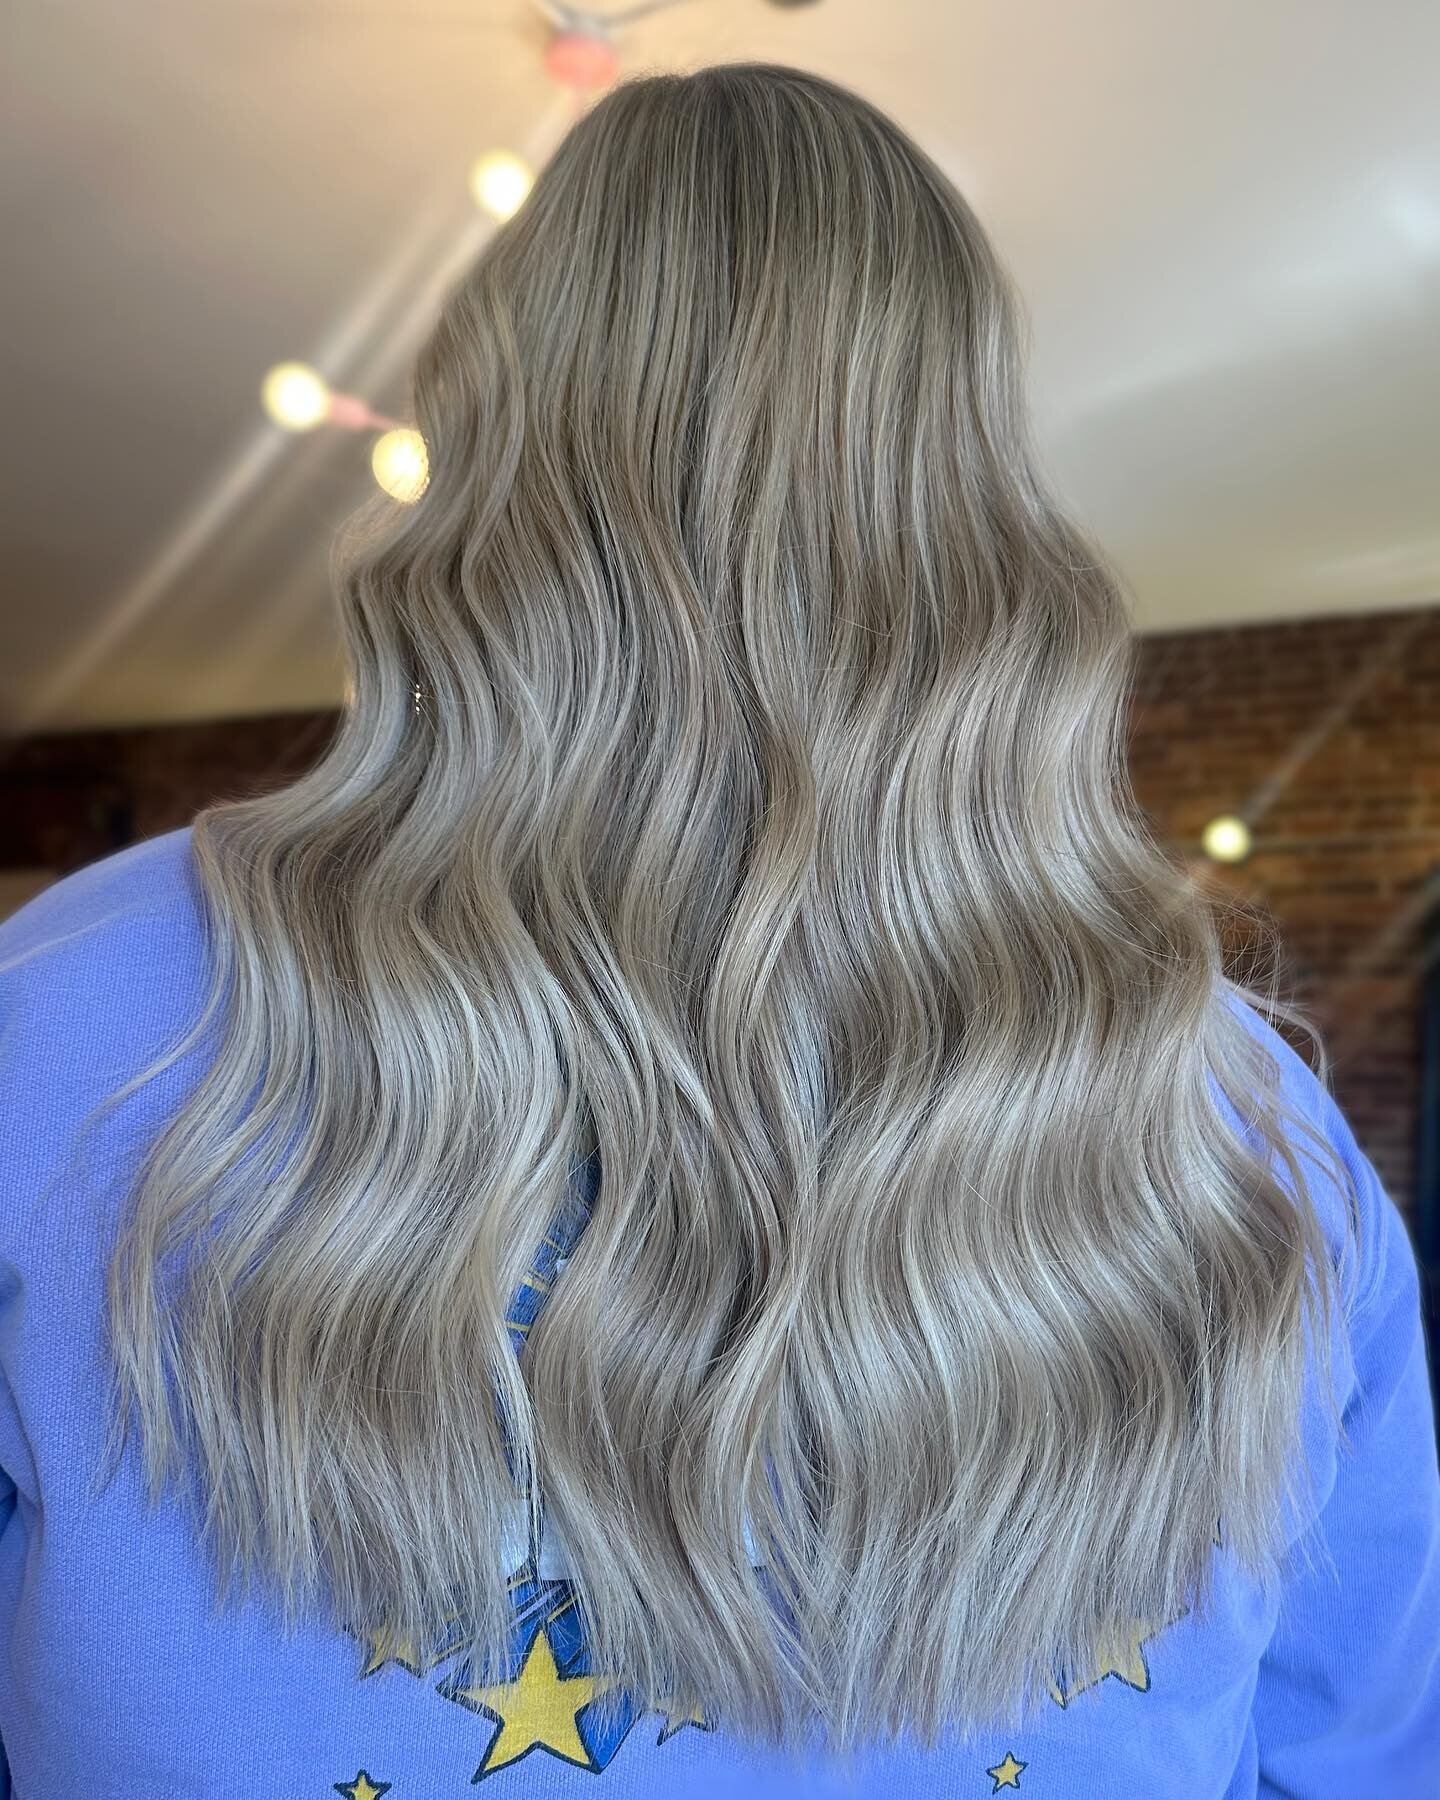 Now is the time to make those appointments for your spring and summer blondes ☀️ I&rsquo;m booking out for color until late March so make sure you snag yourself a spot! 

#lex #lexky #lexington #lexingtonky #lexingtonhairstylist #lexingtonhair #kyhai